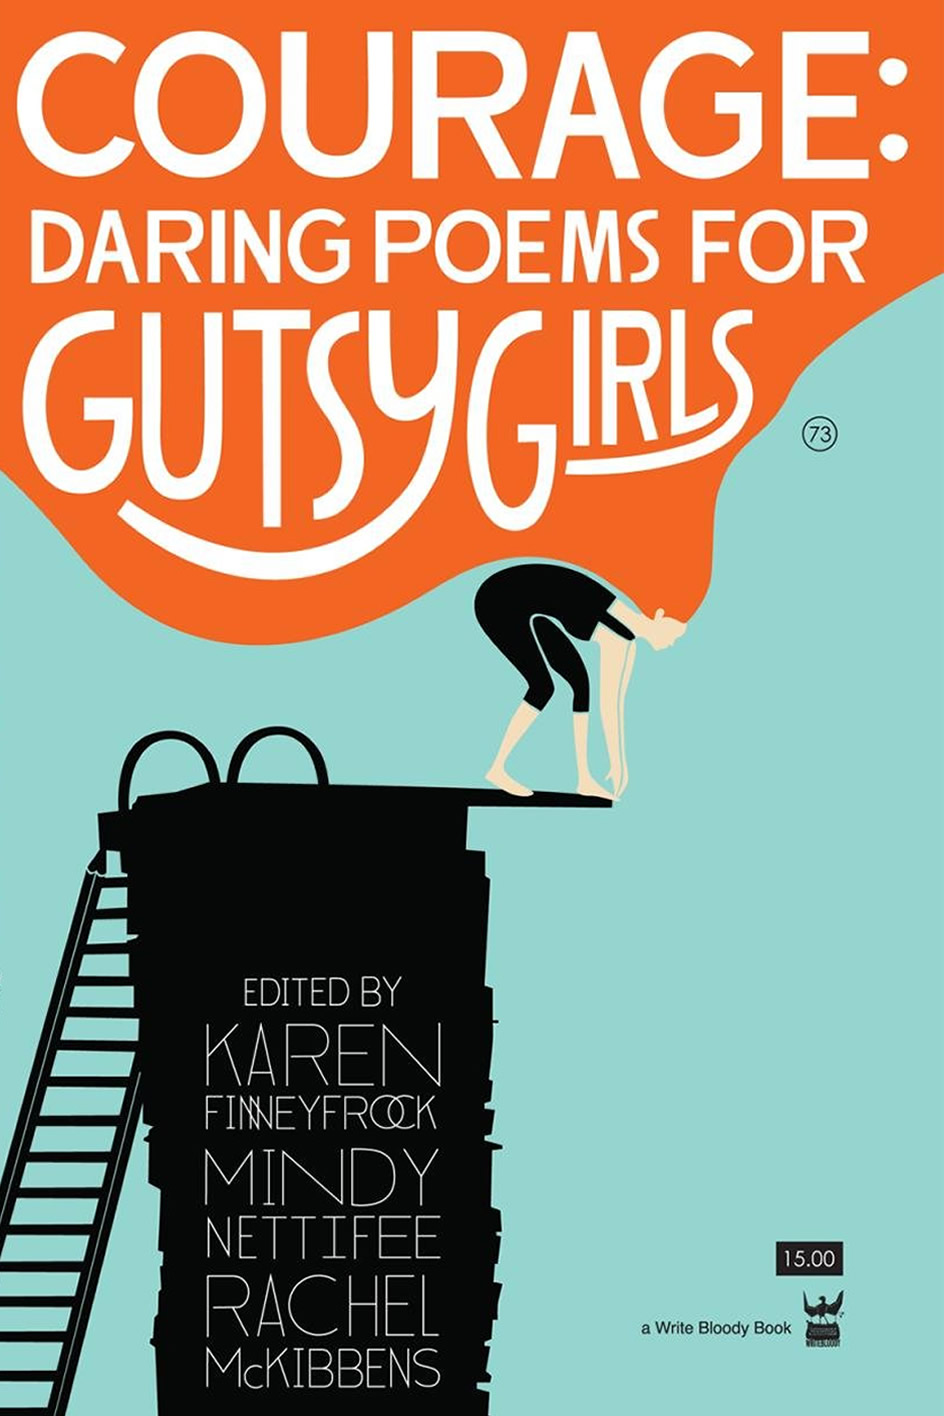 cover art for poetry collection Courage: Daring Poems for Gutsy Girls